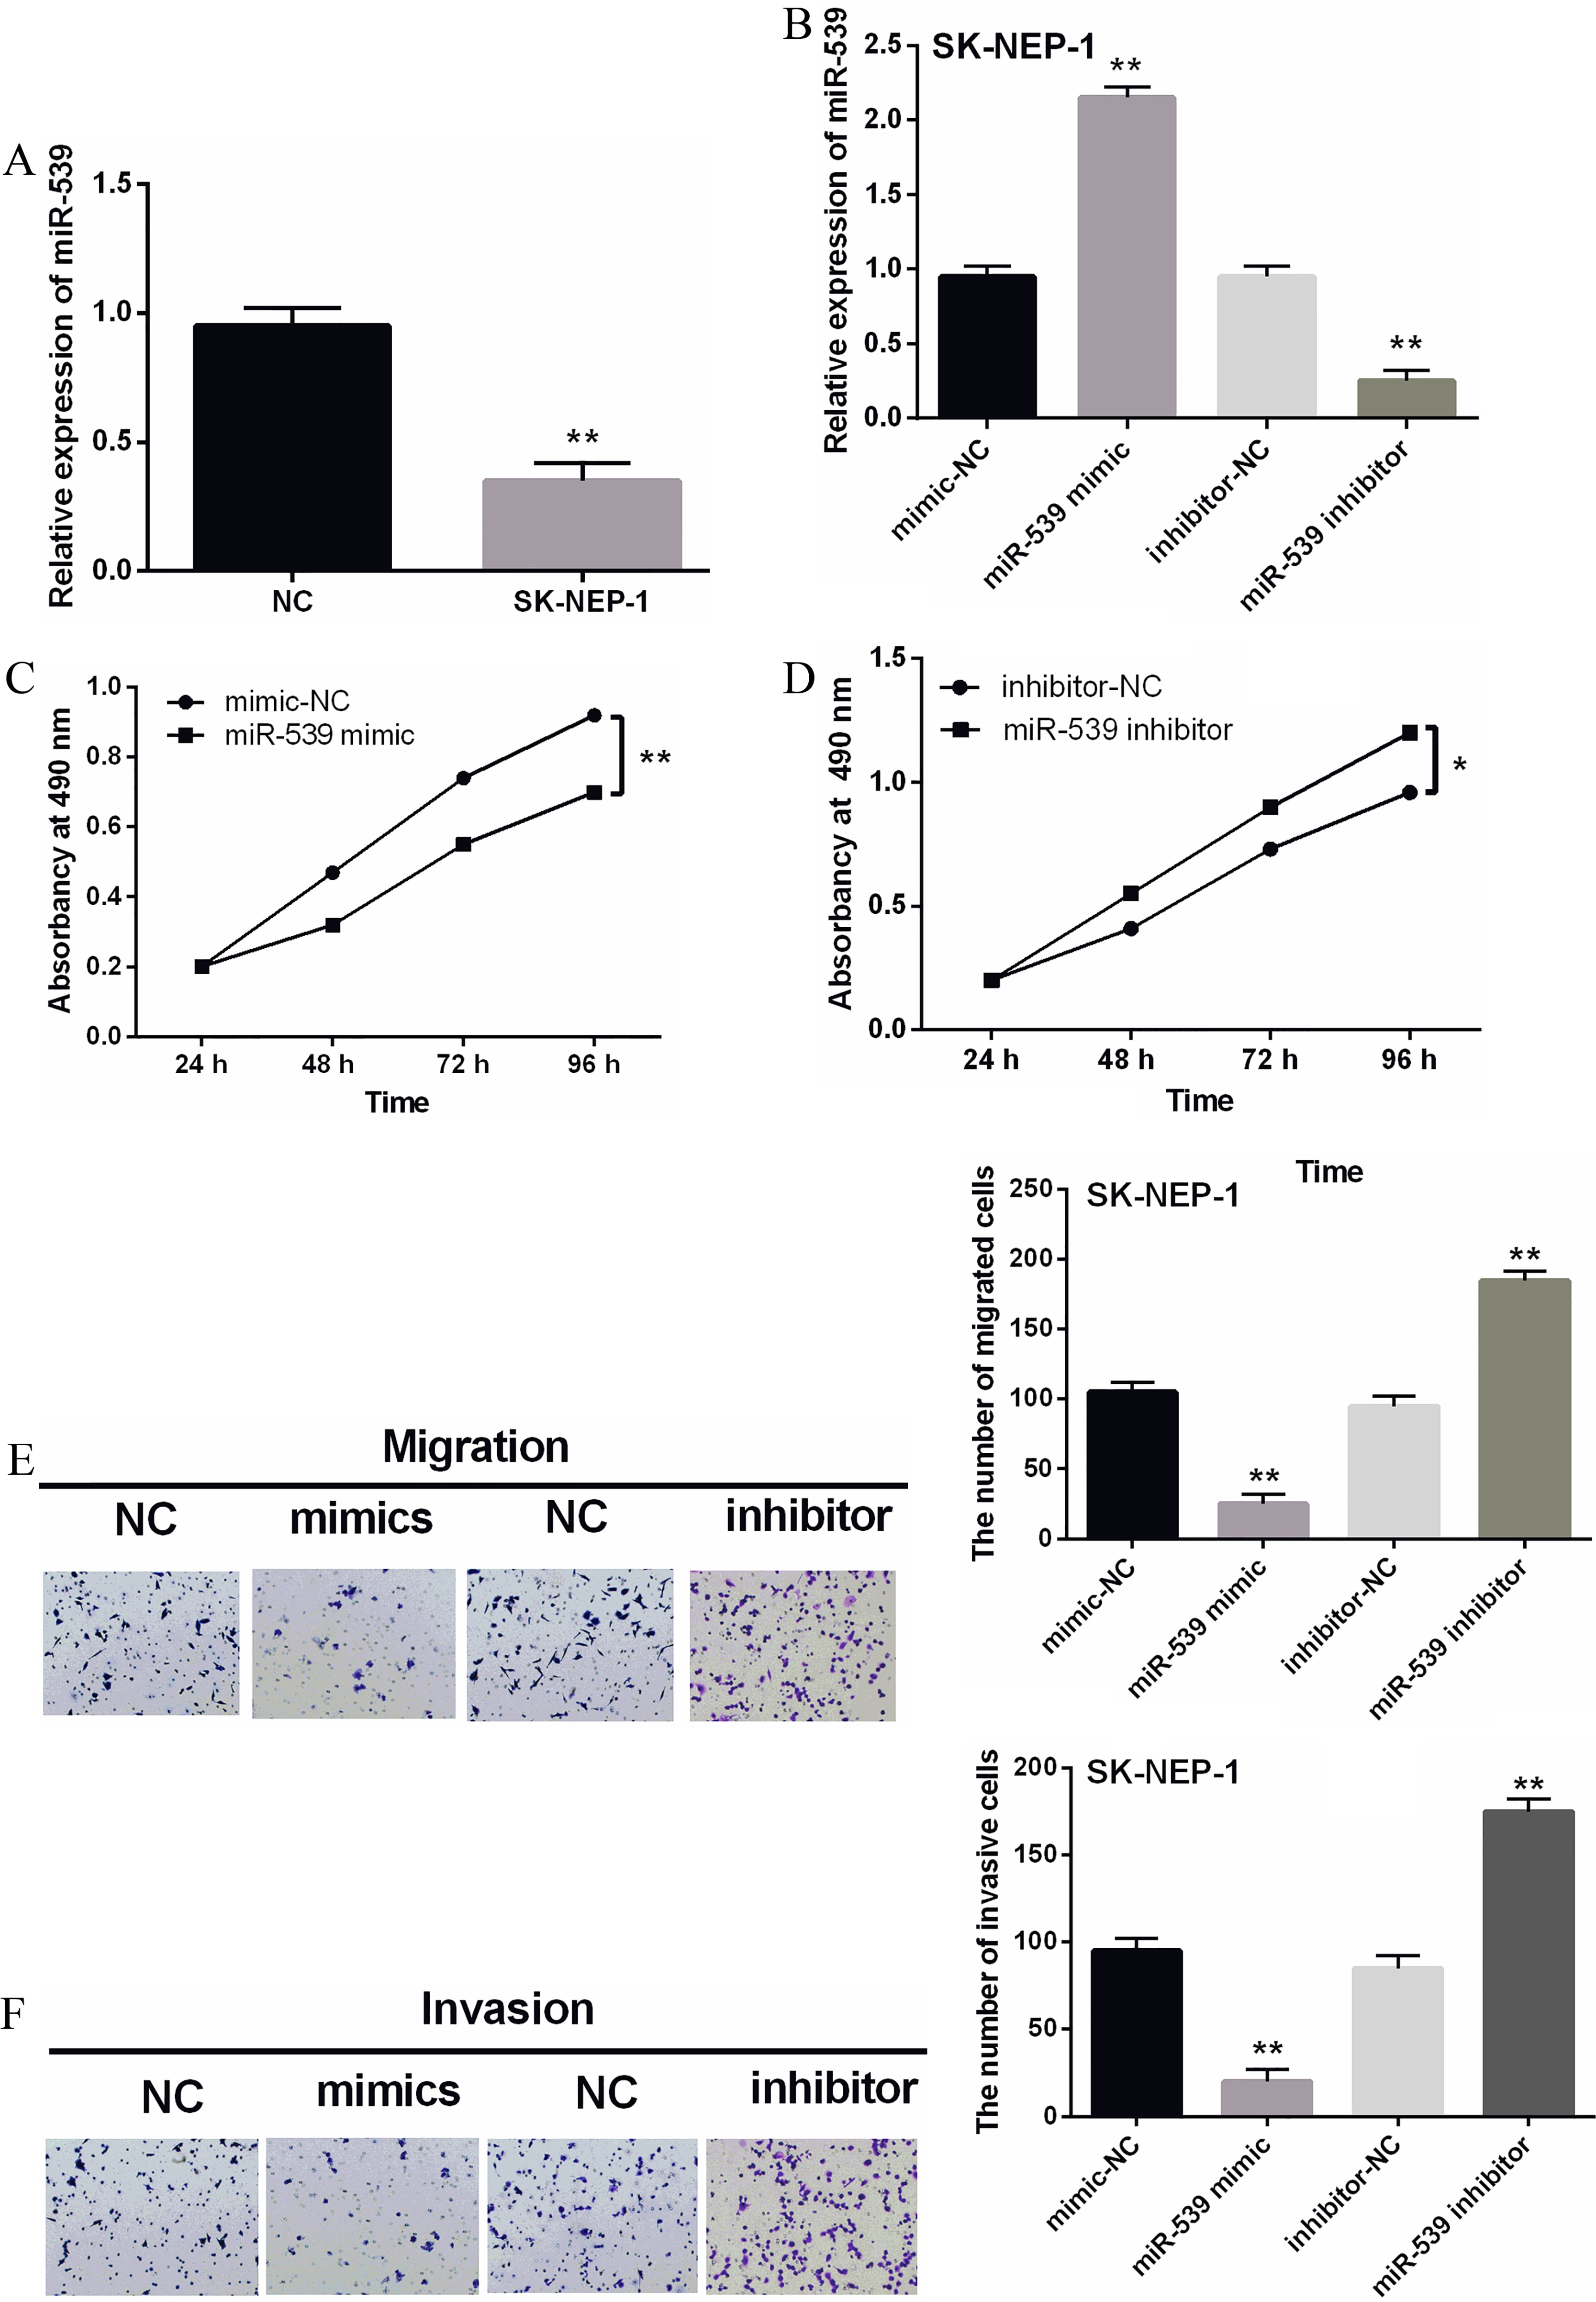 Overexpression of miR-539 suppressed the proliferation, migration and invasion of WT cells. (A) The miR-539 expression in SK-NEP-1 cell lines. (B) The miR-539 expressions were examined in SK-NEP-1 cells containing miR-539 mimics or inhibitor via qRT-PCR. (C, D) The cell proliferation was measured in cells containing miR-539 mimics or inhibitor via MTT assay. (E, F) Cell migration and invasion analysis in SK-NEP-1 cells containing miR-539 mimics or inhibitor was examined by Transwell assay. *P< 0.05, **P< 0.01.